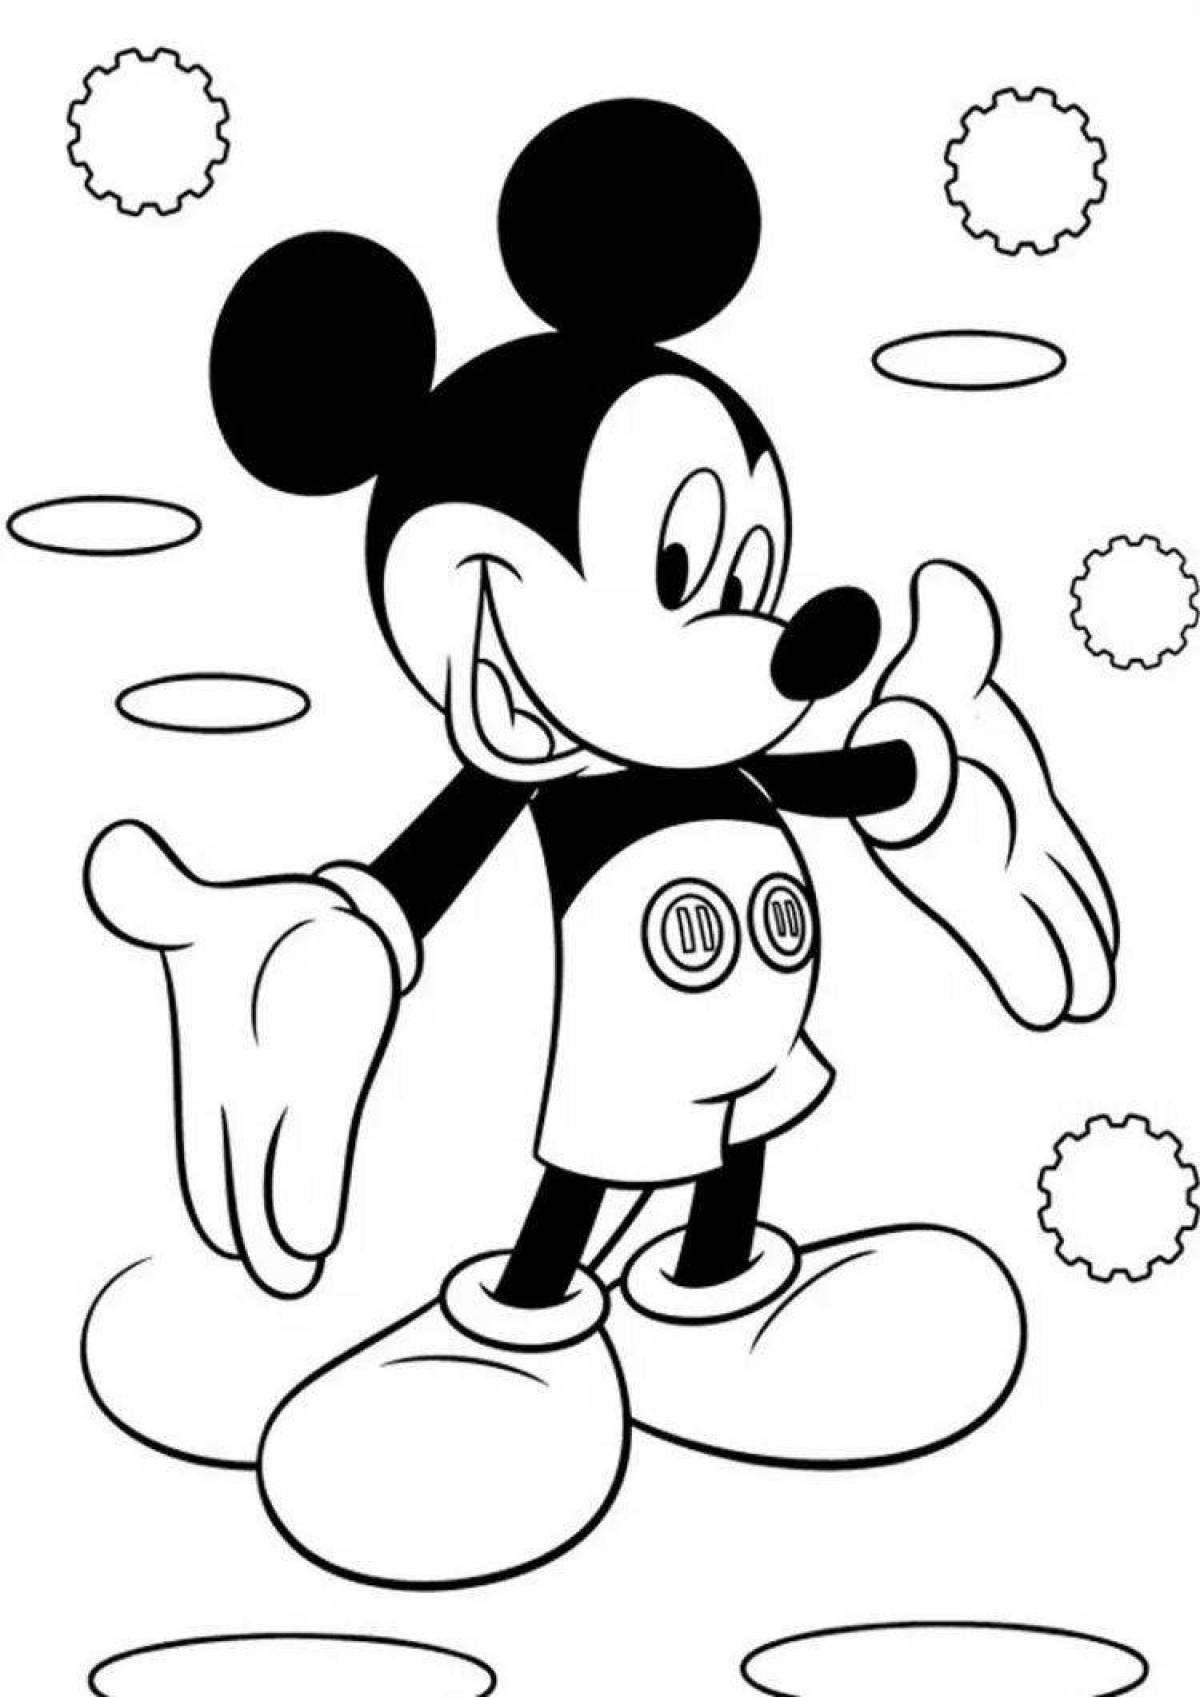 Mickey mouse wonderful coloring book for boys